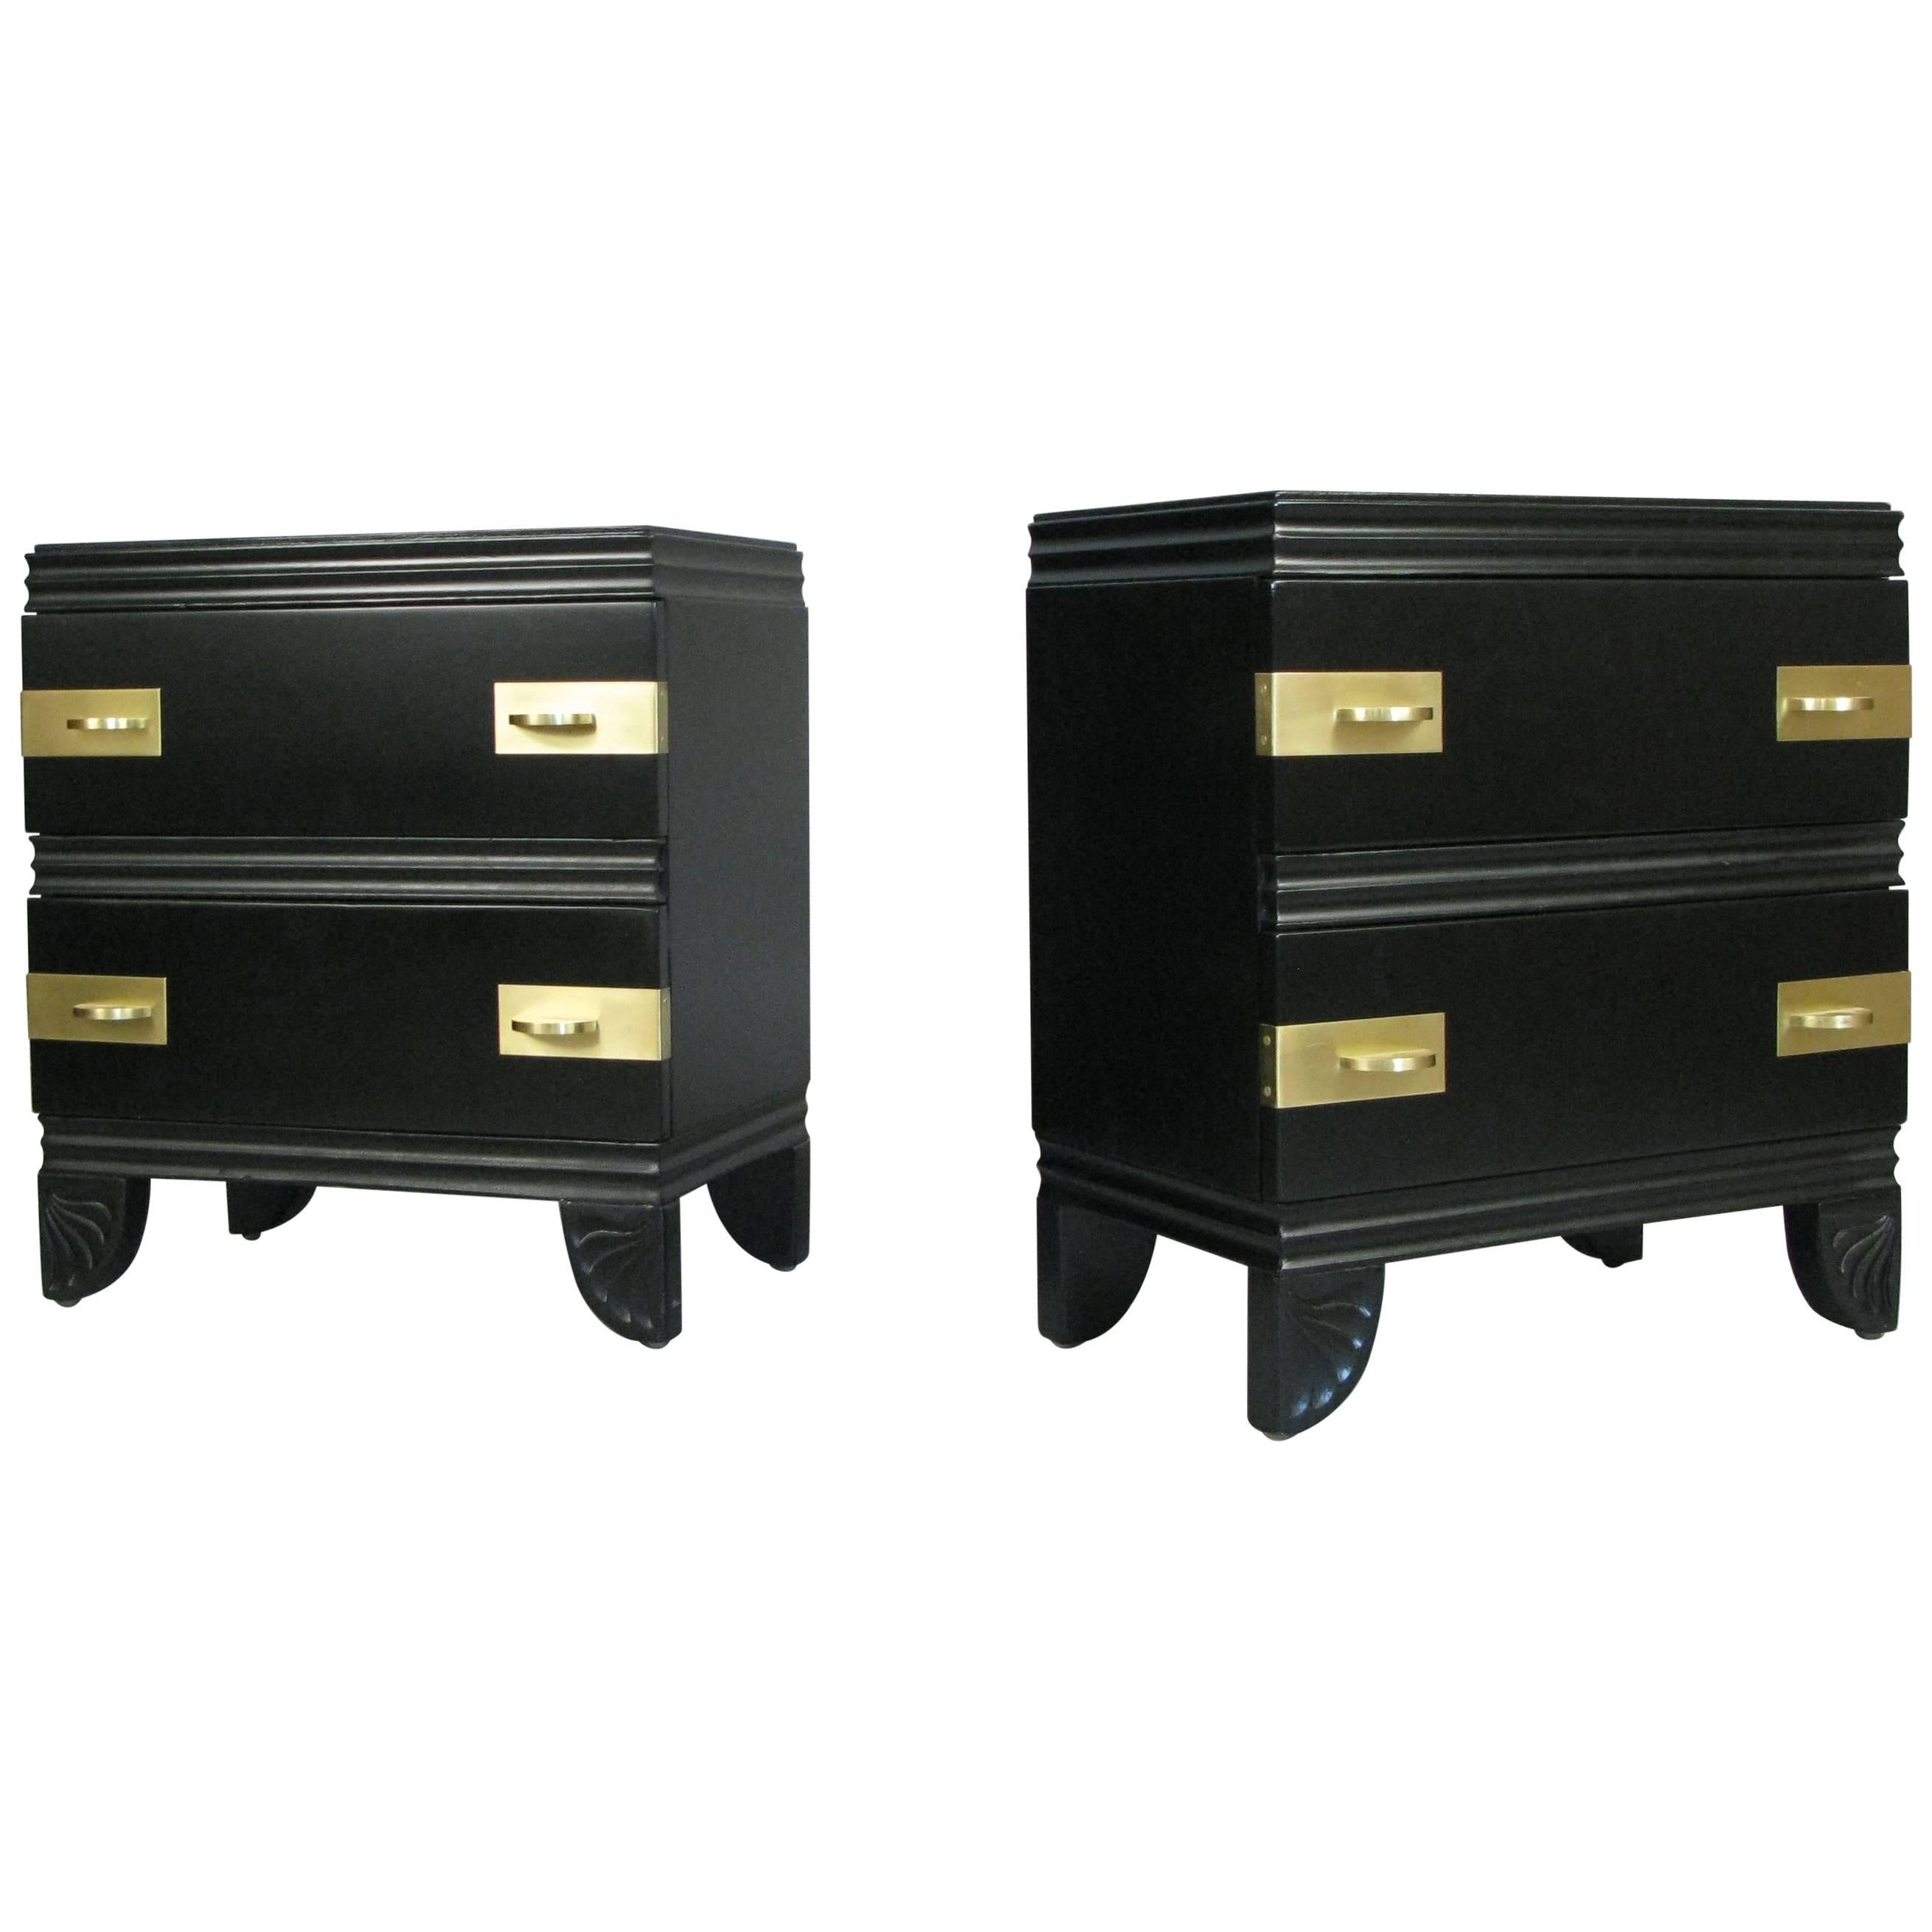 Pair of 1950s Lacquer and Brass Nightstands by John Stuart